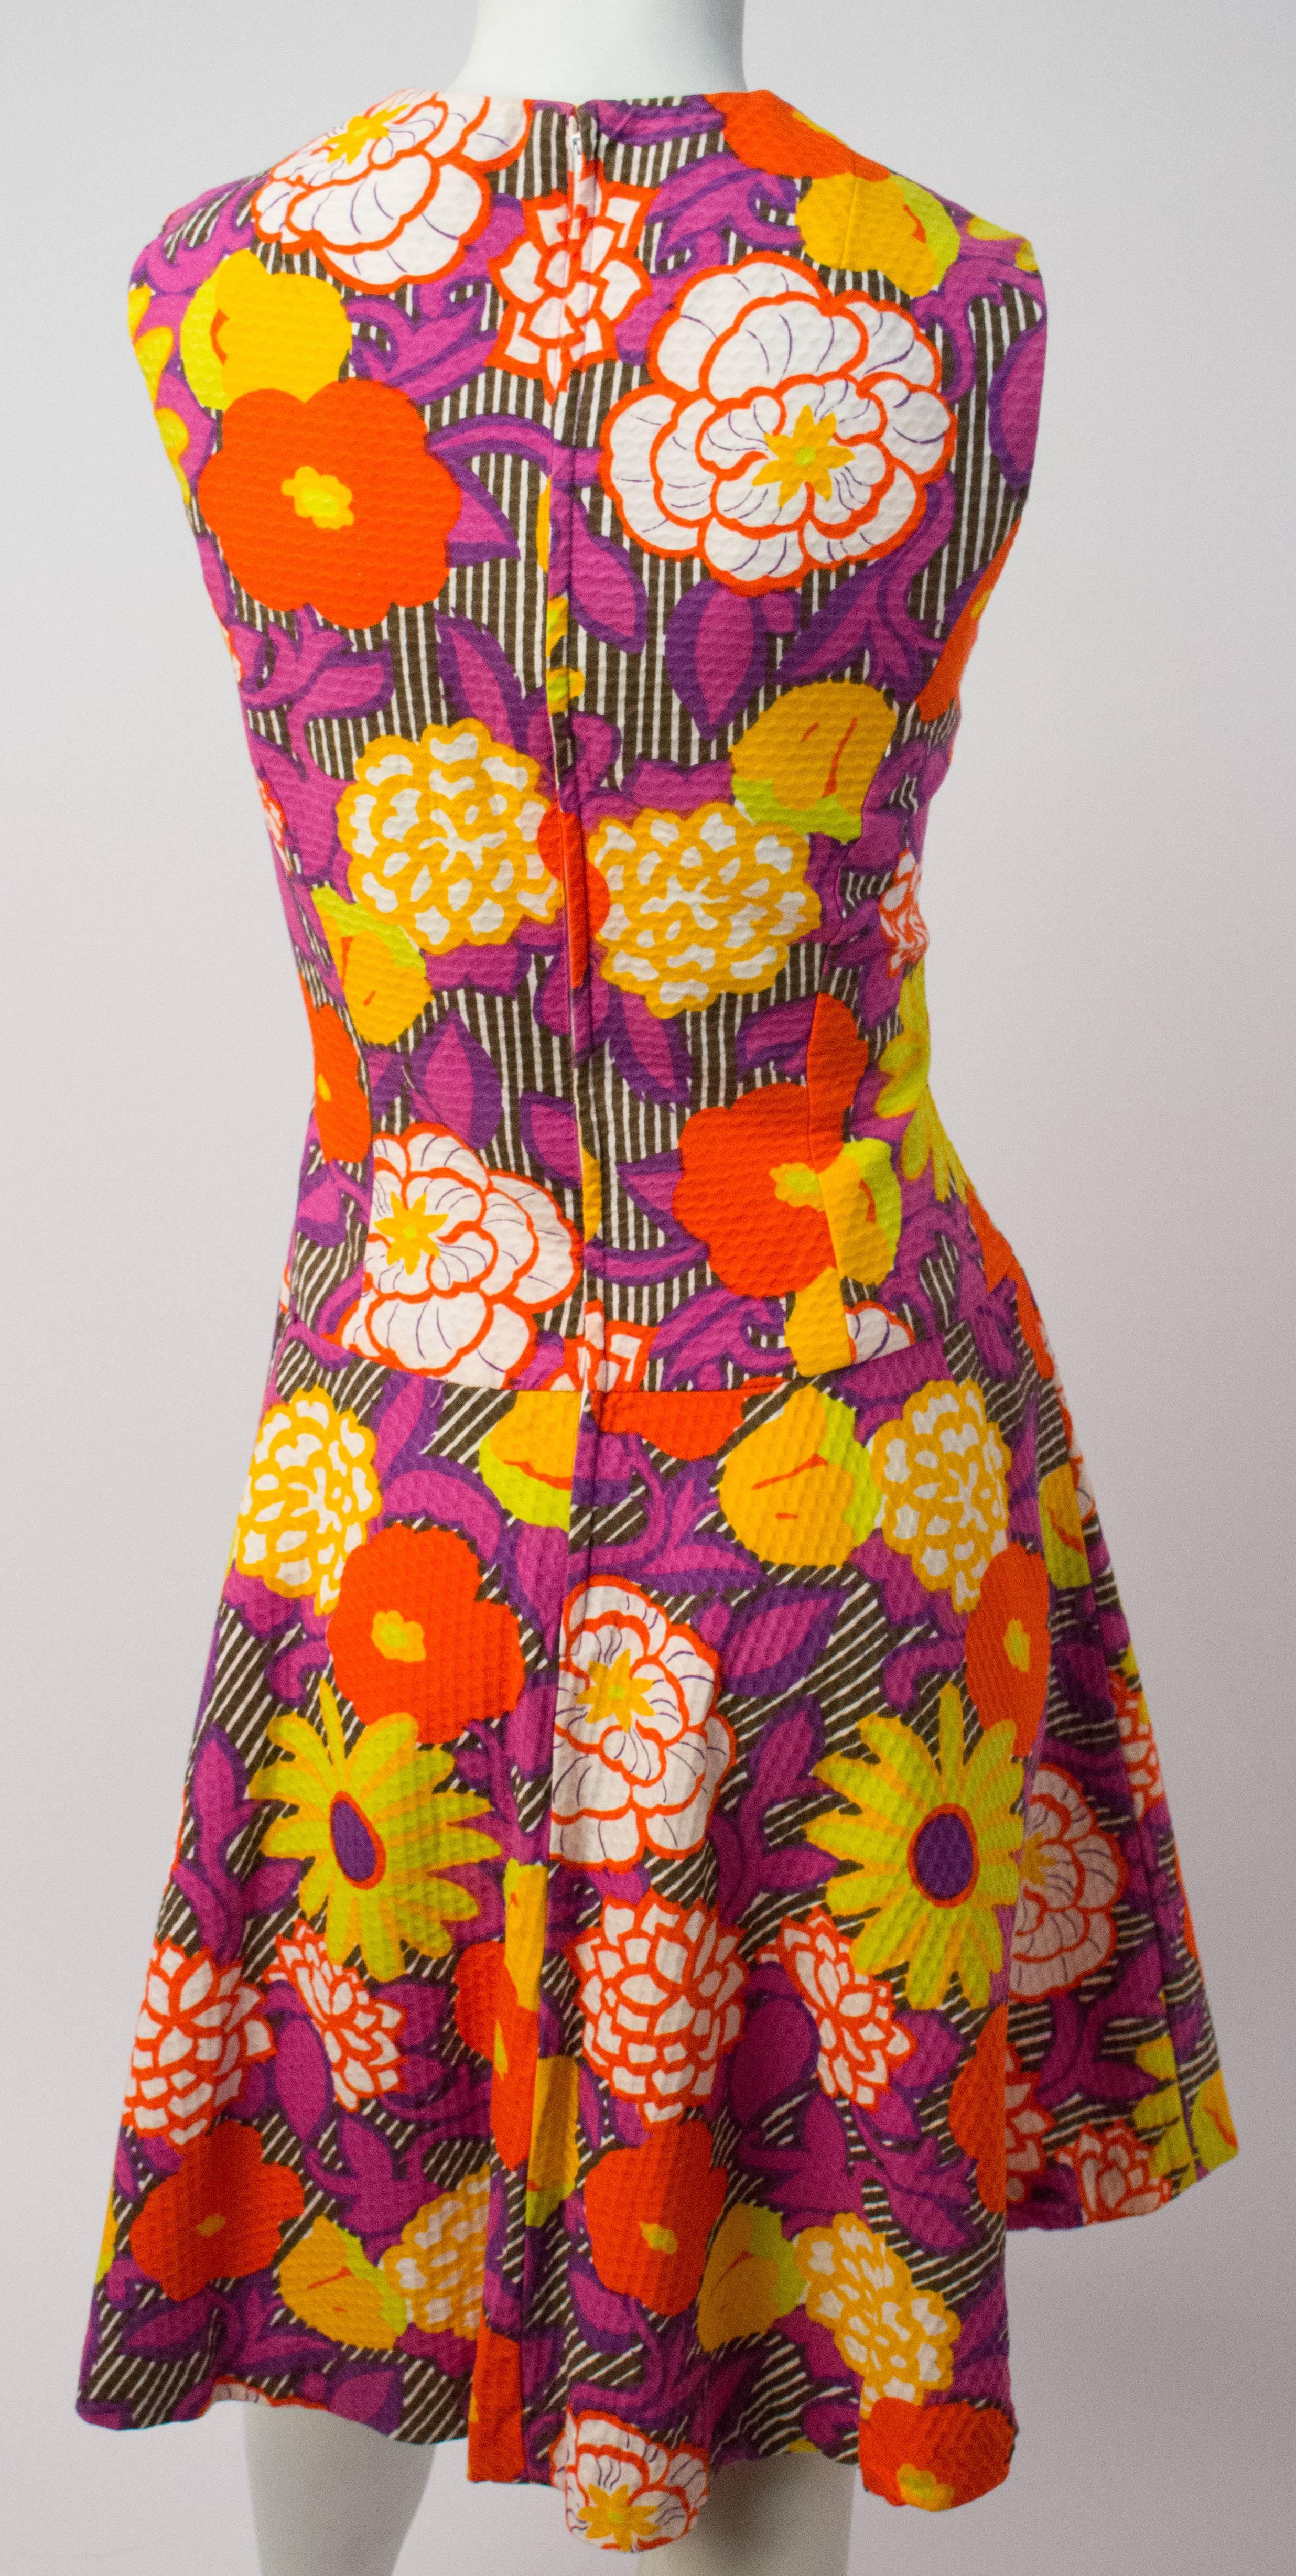 60s Flower Power Drop-Waist Dress. Bright florals printed on a textured waffle weave. Two front patch pockets. Back zipper closure. 